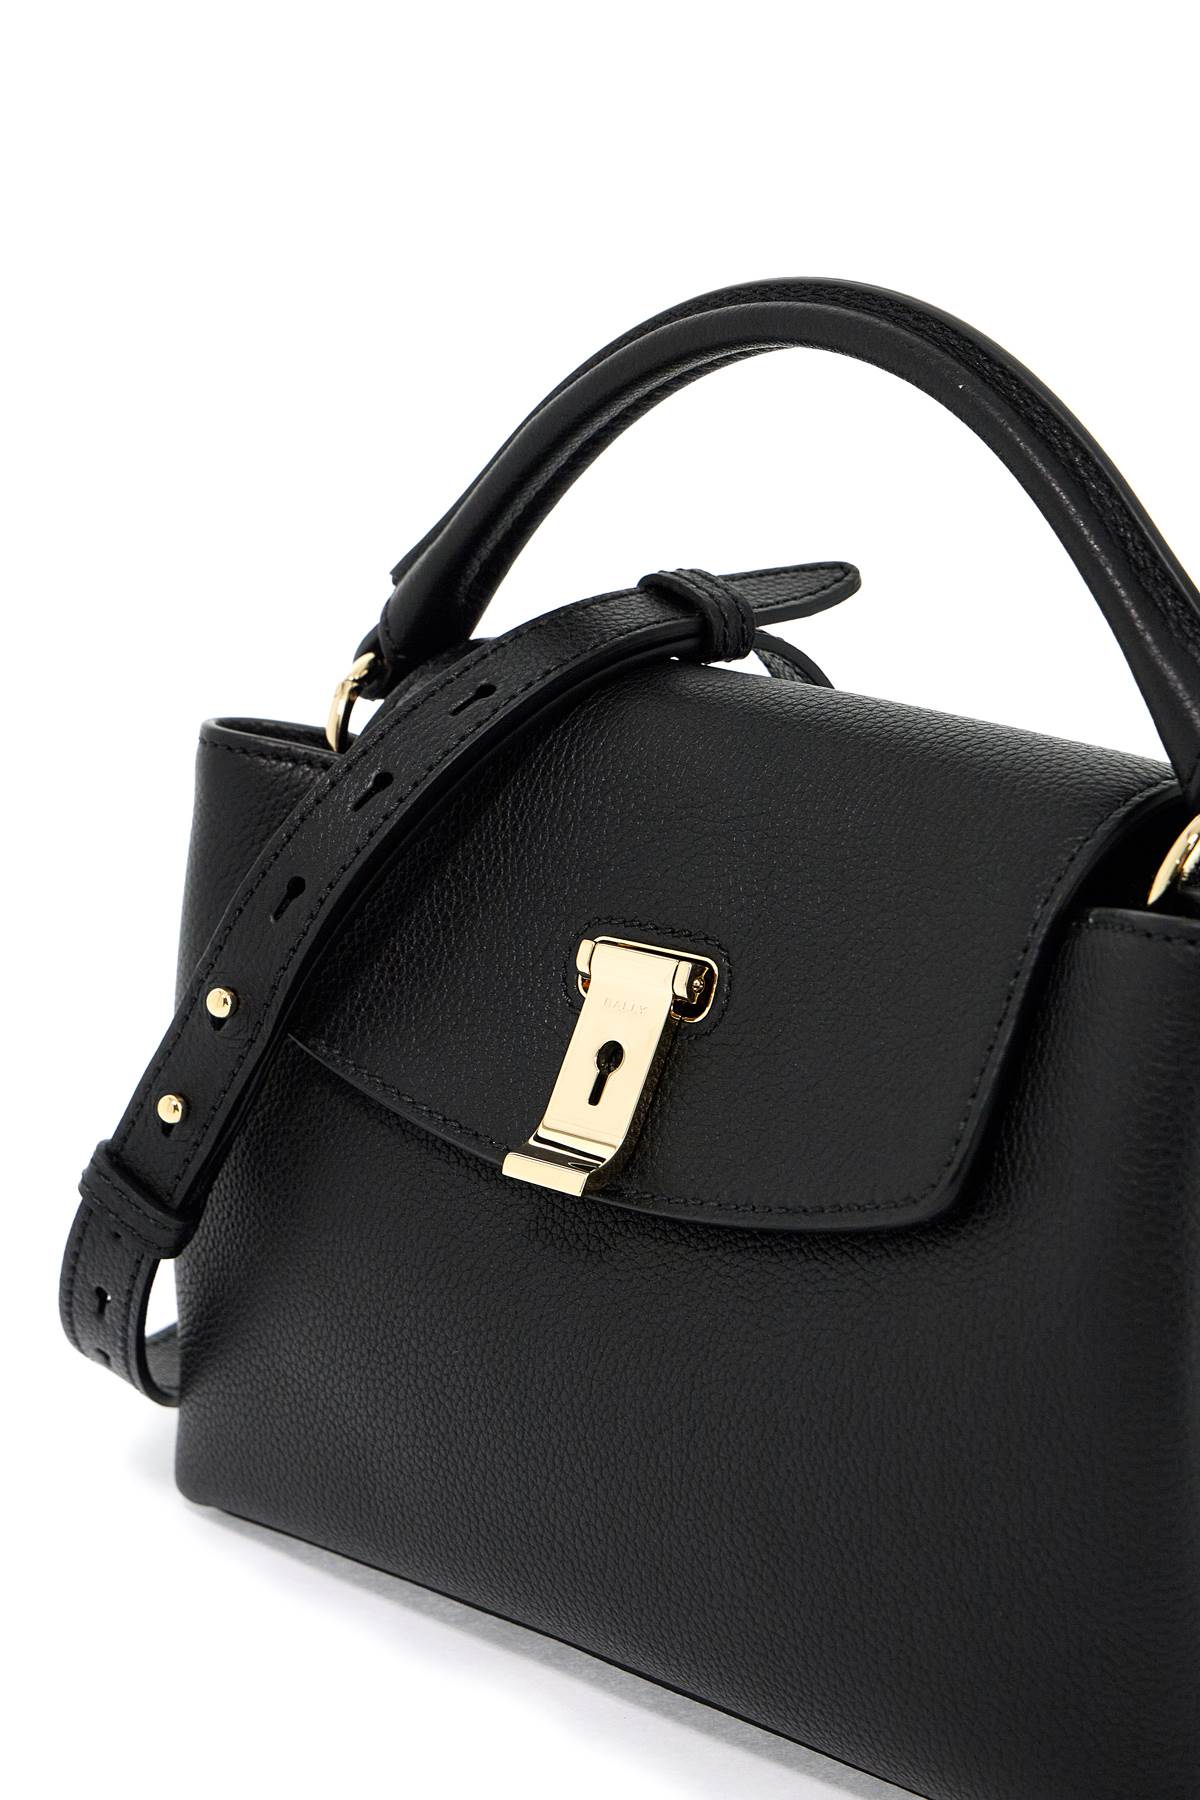 Bally "handbag Layka In Hammered Leatherreplace With Double Quote   Black